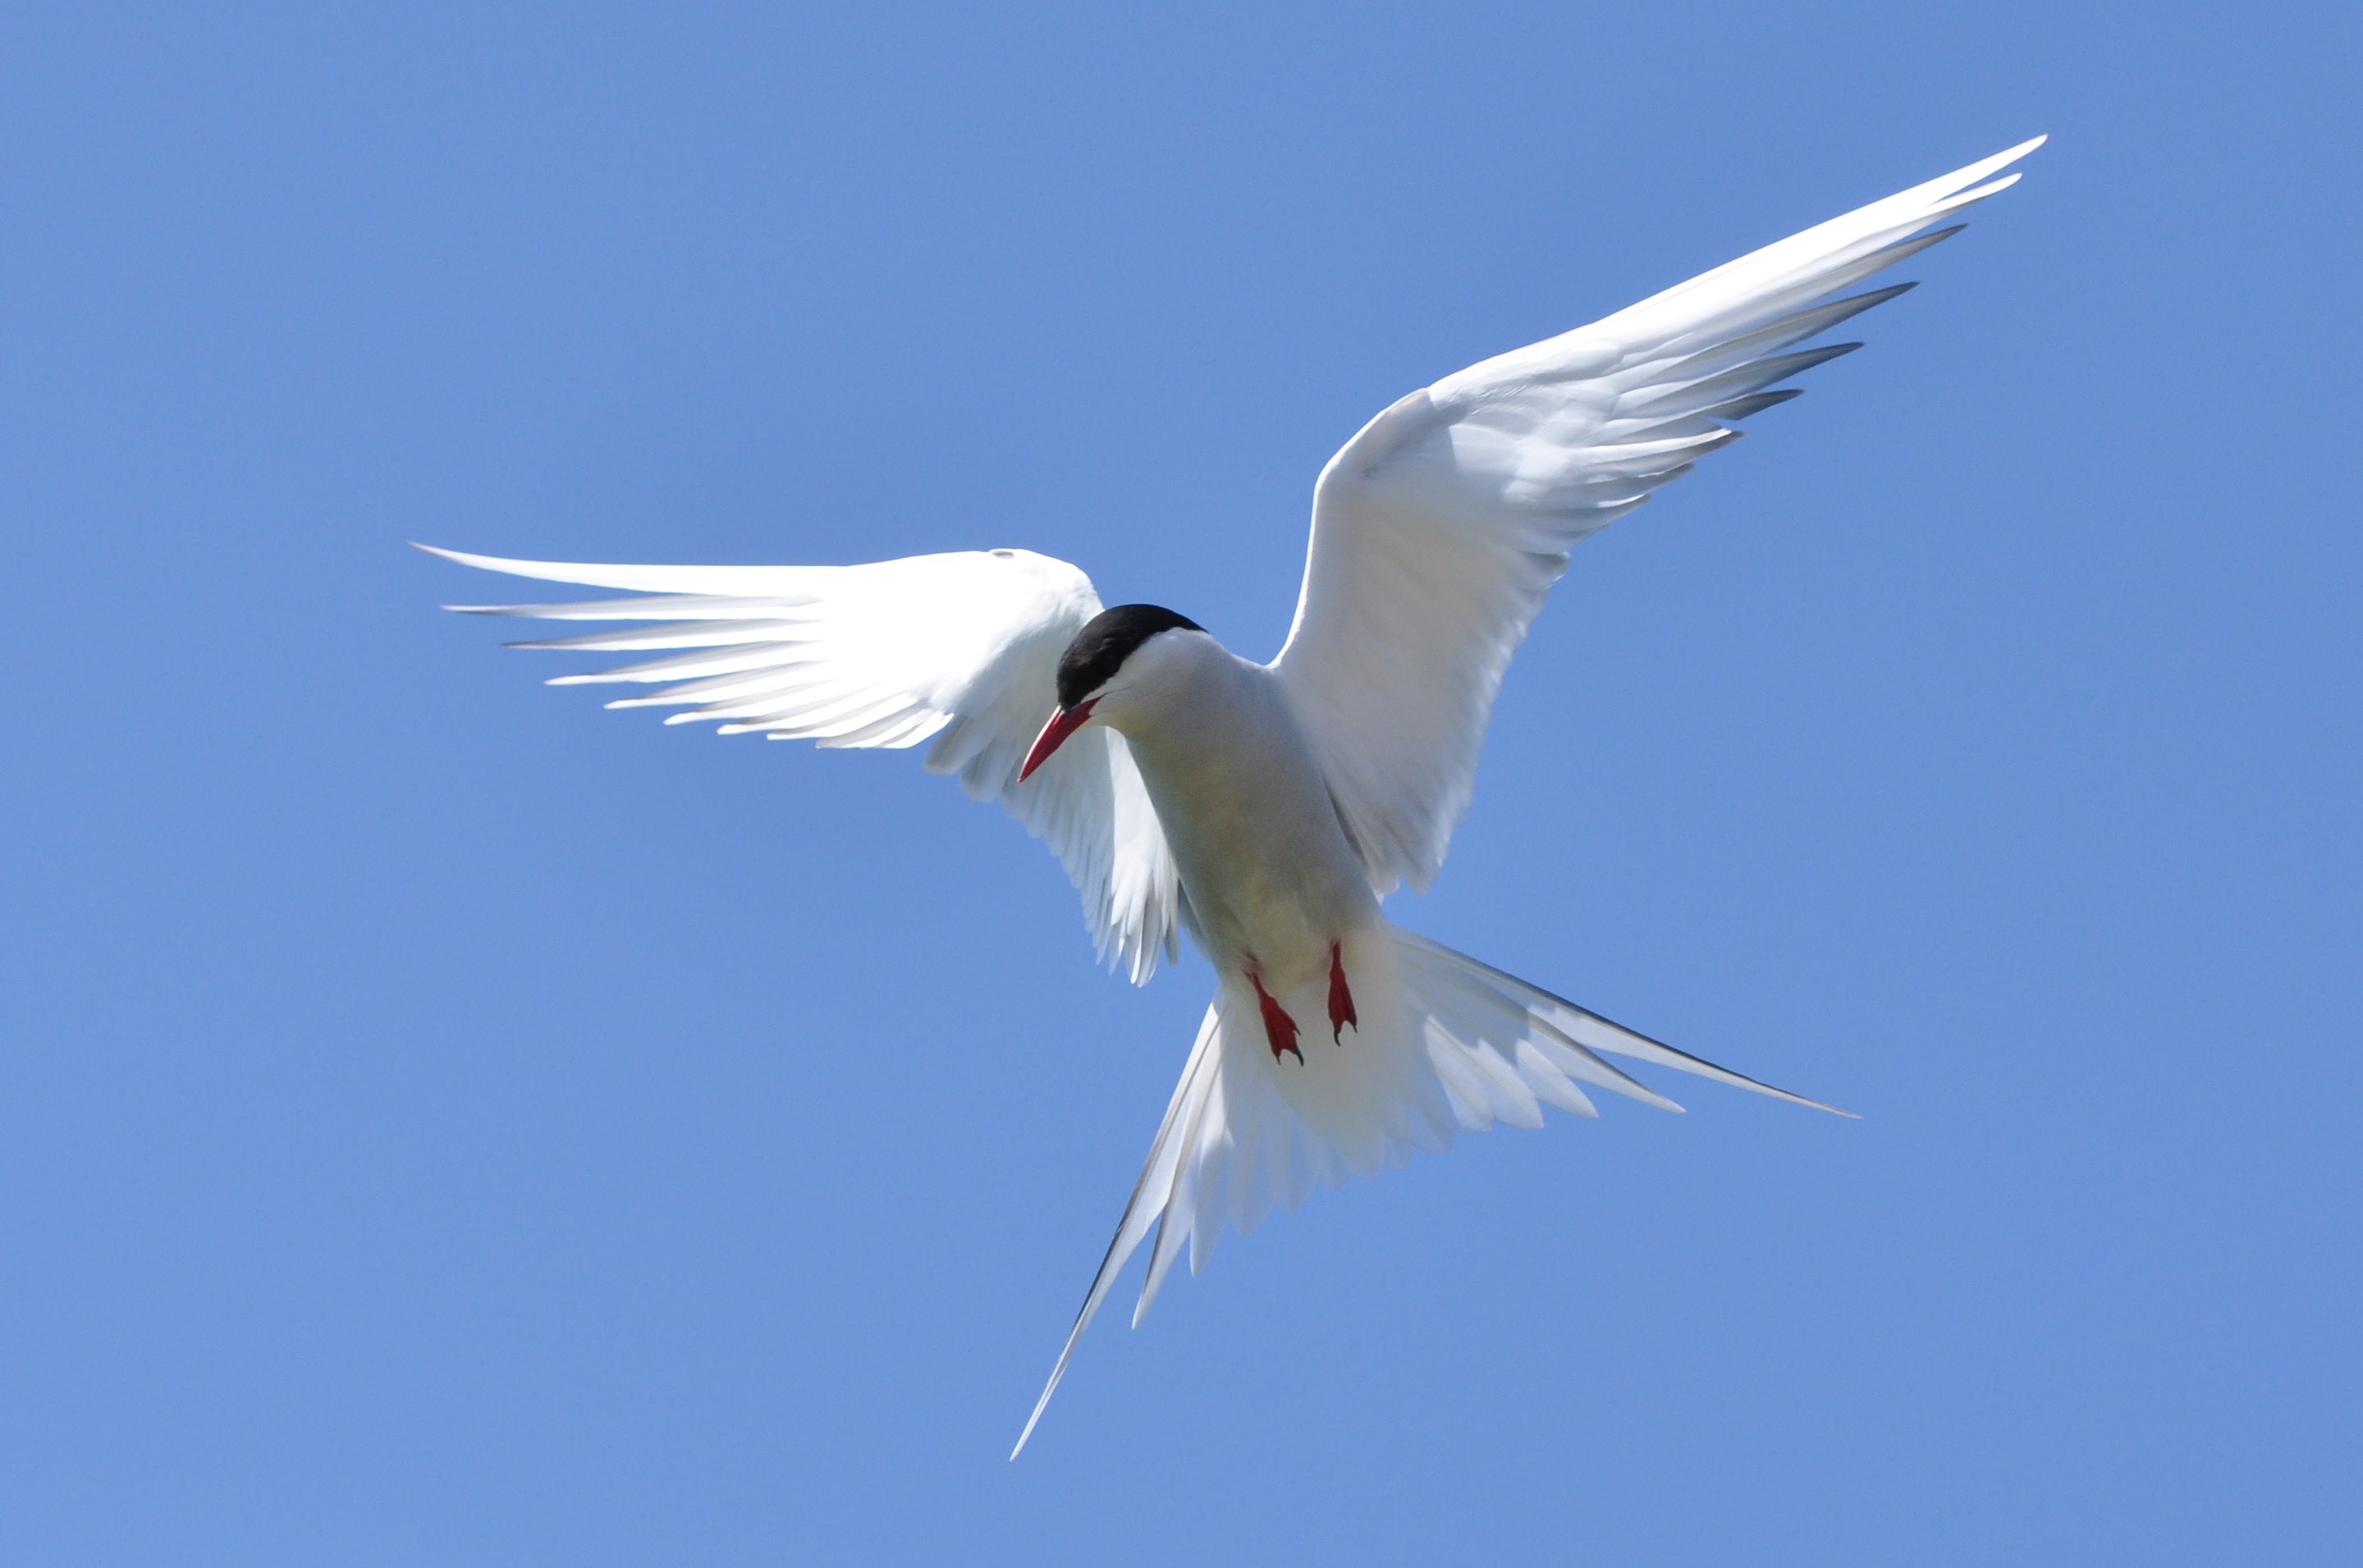 photo of a white bird with a black cap of feathers and a pointed, orange beak; flying against a blue sky, with tail feathers that splay out to the sides